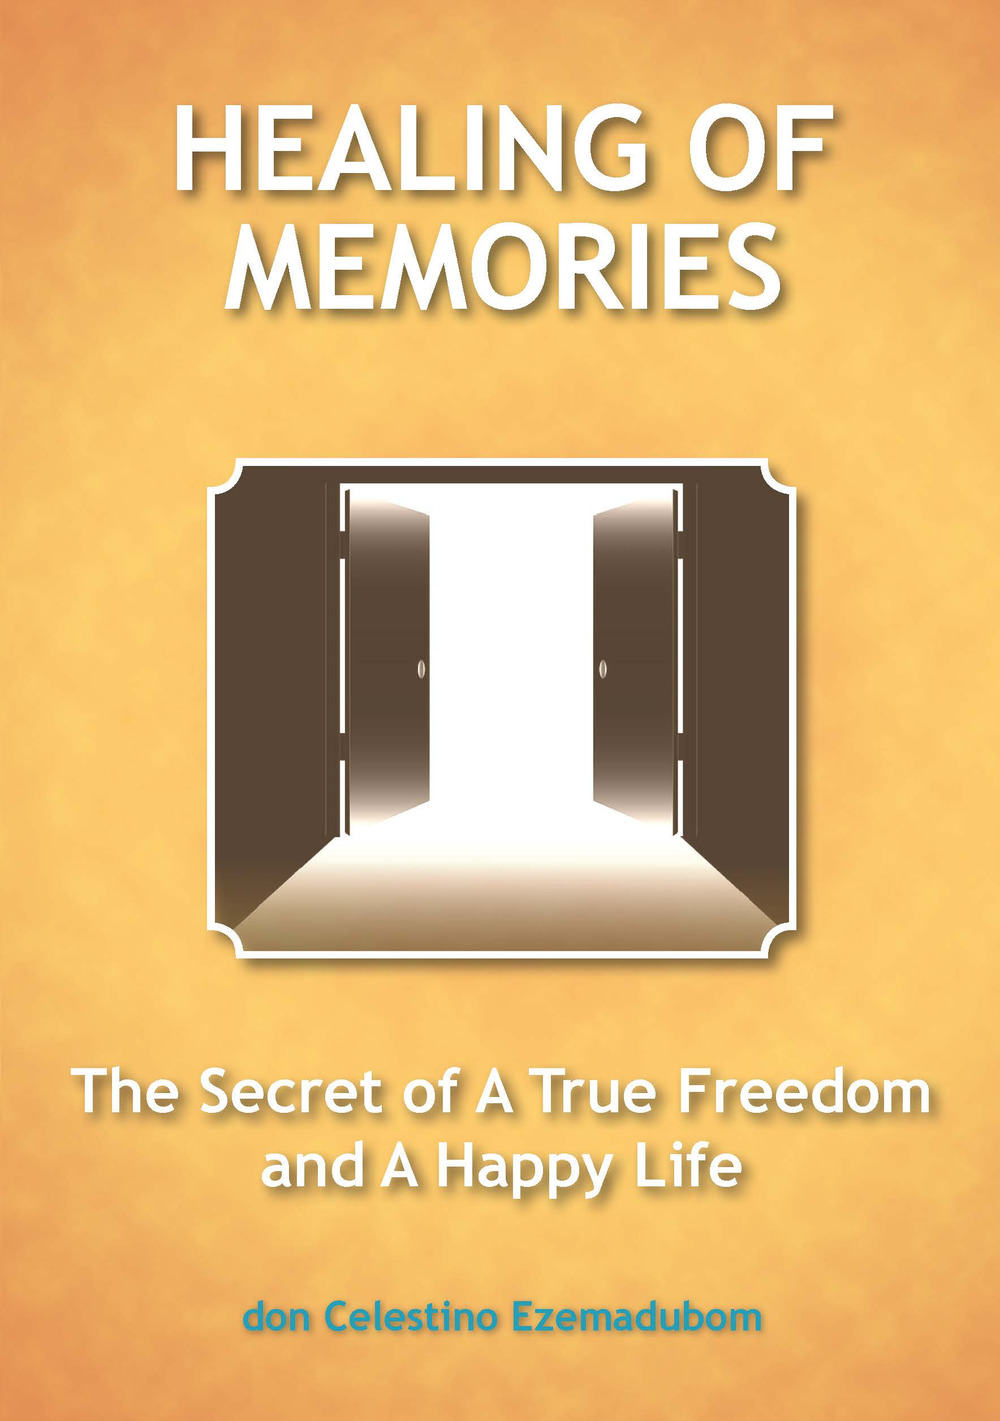 Healing of memories. The secret of a true freedom and a happy life